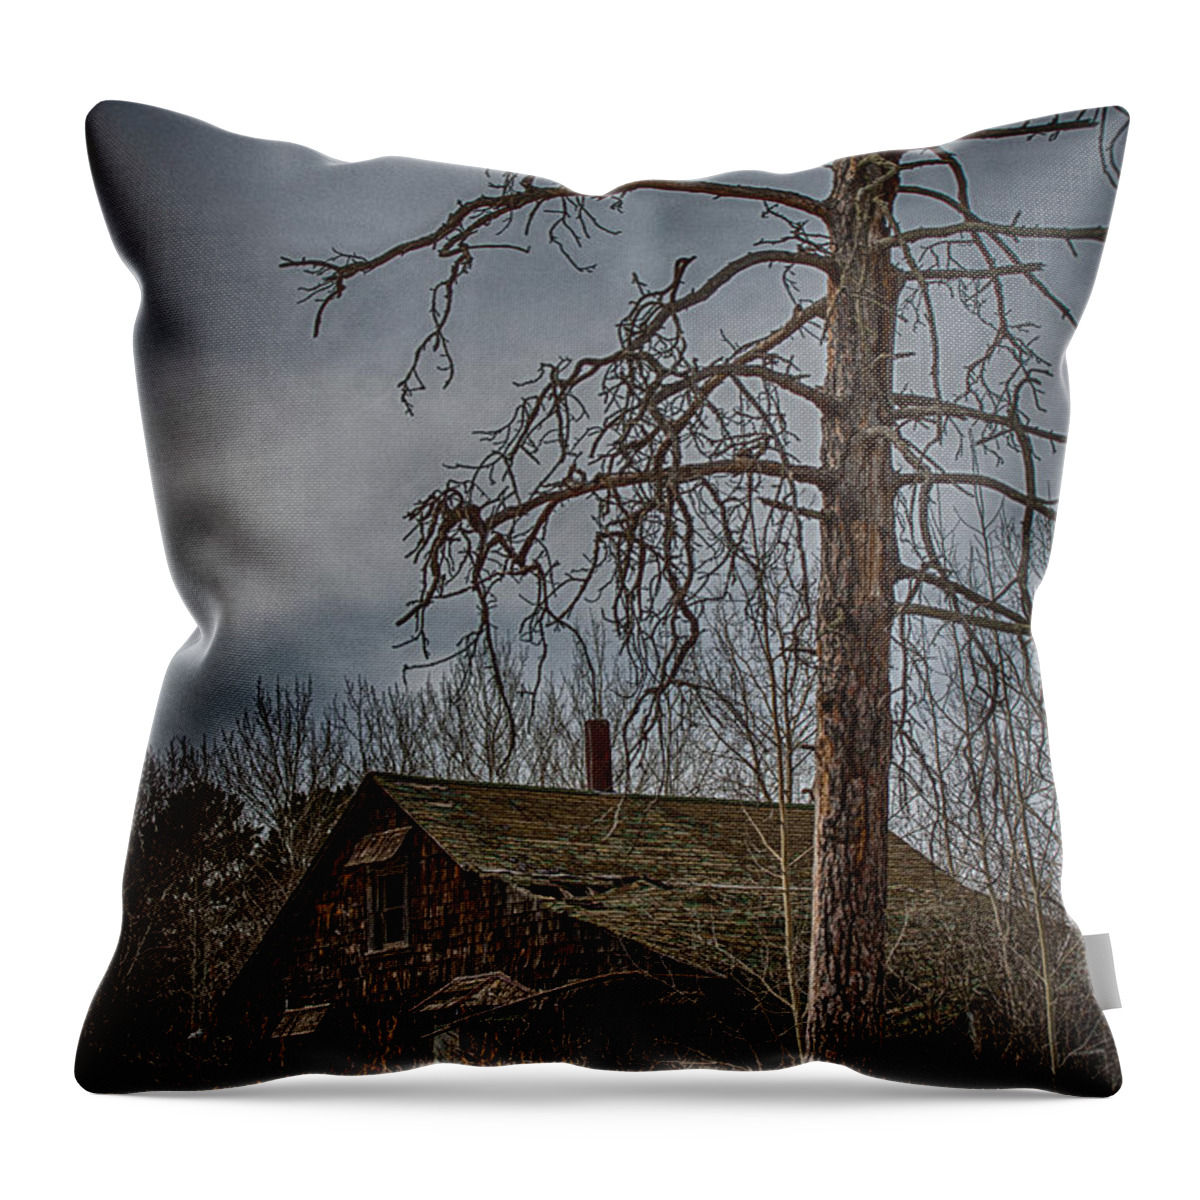 Old Throw Pillow featuring the photograph Abandoned House by Paul Freidlund